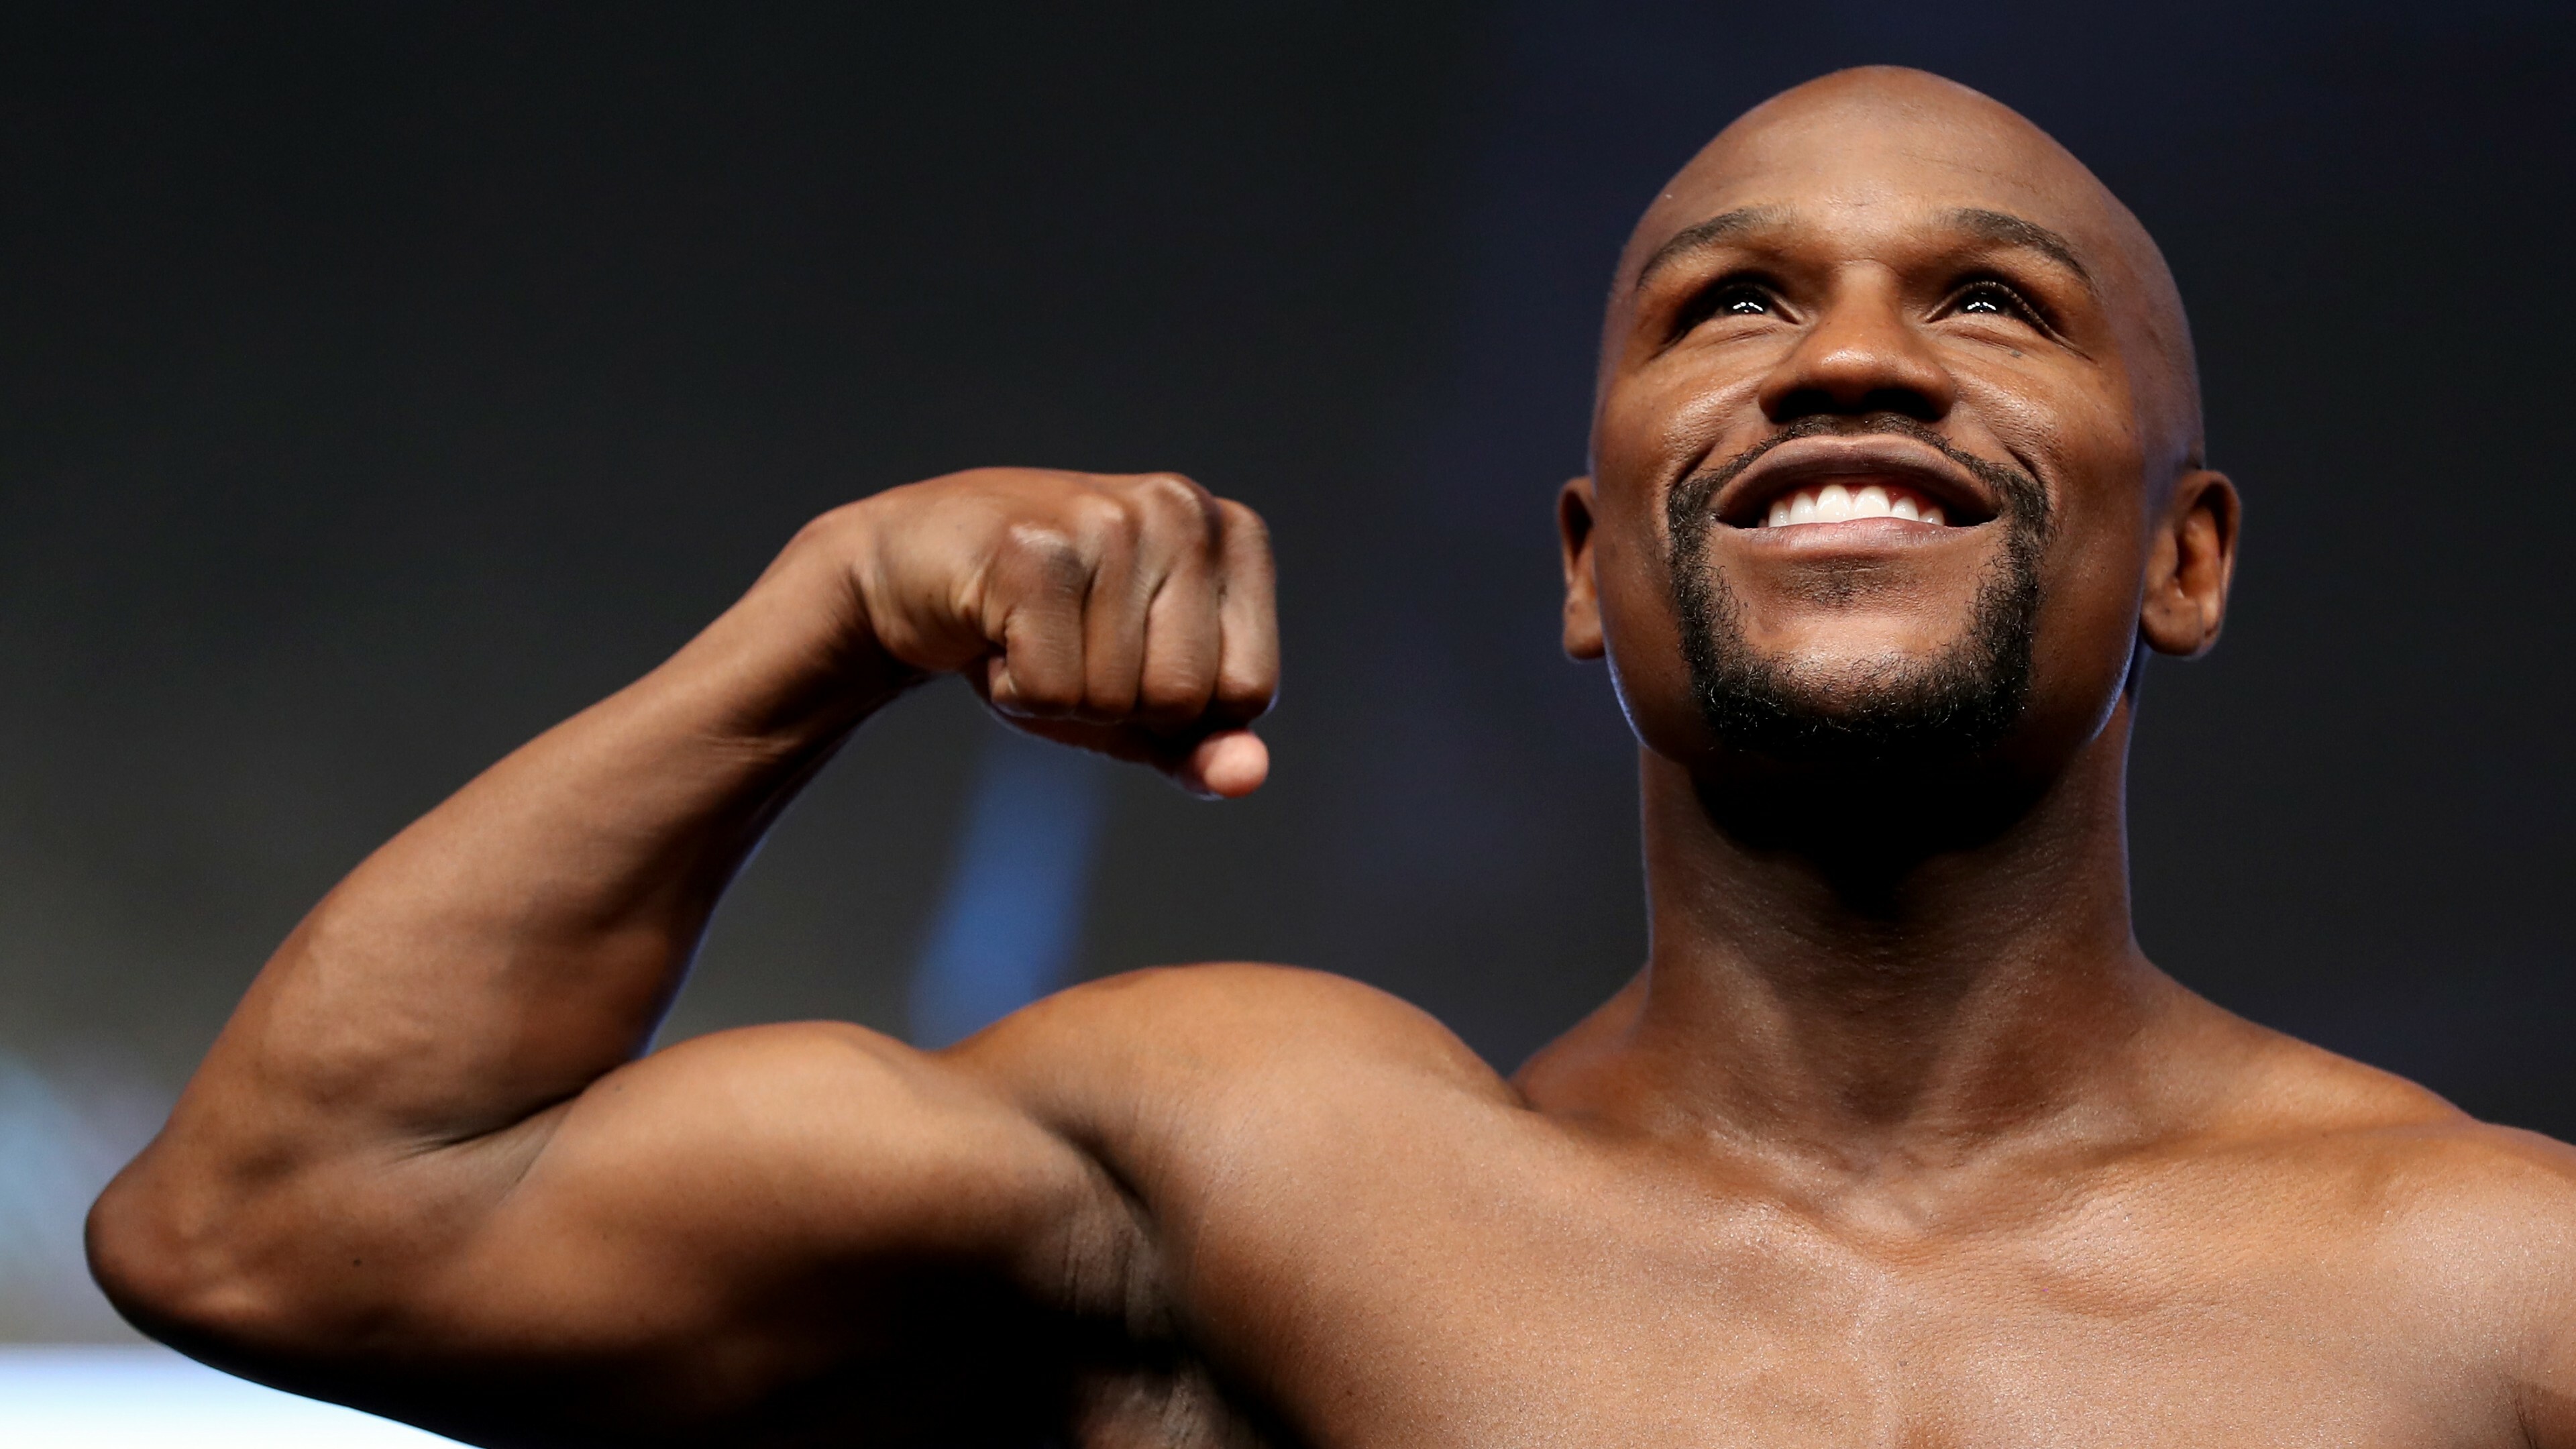 Boxing: Floyd Mayweather, won a bronze medal in the featherweight division at the 1996 Olympics. 3840x2160 4K Background.